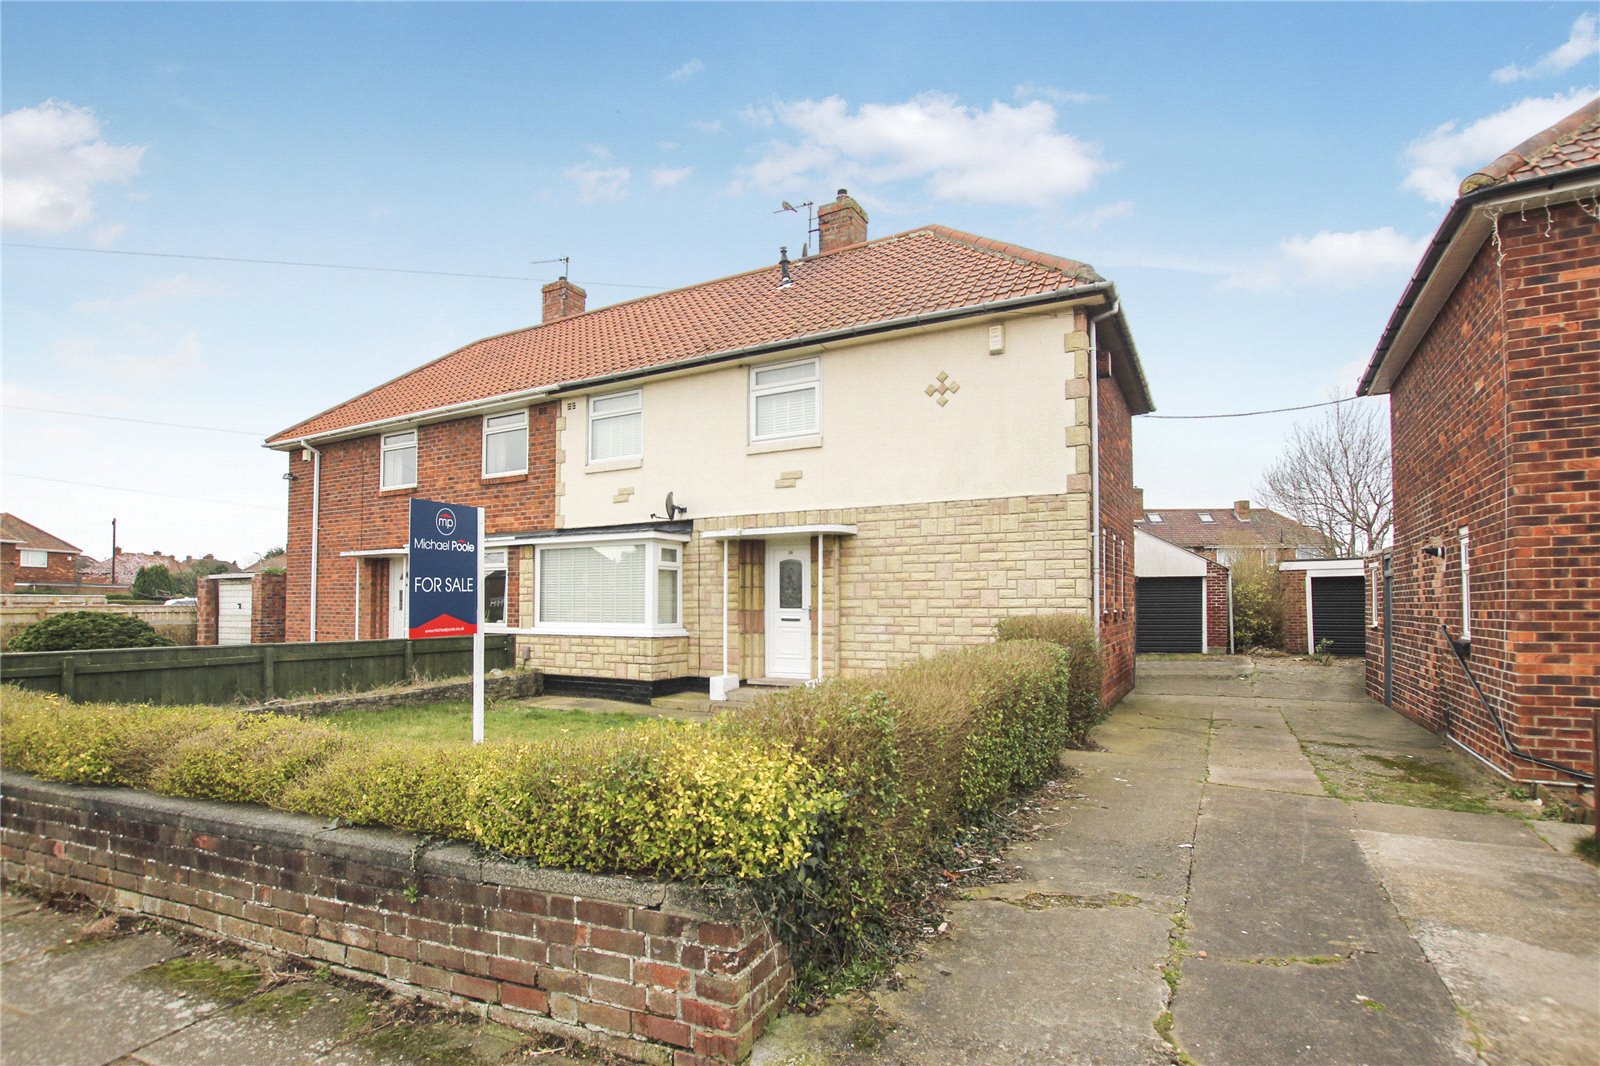 3 bed house for sale in Pemberton Crescent, Beechwood  - Property Image 1